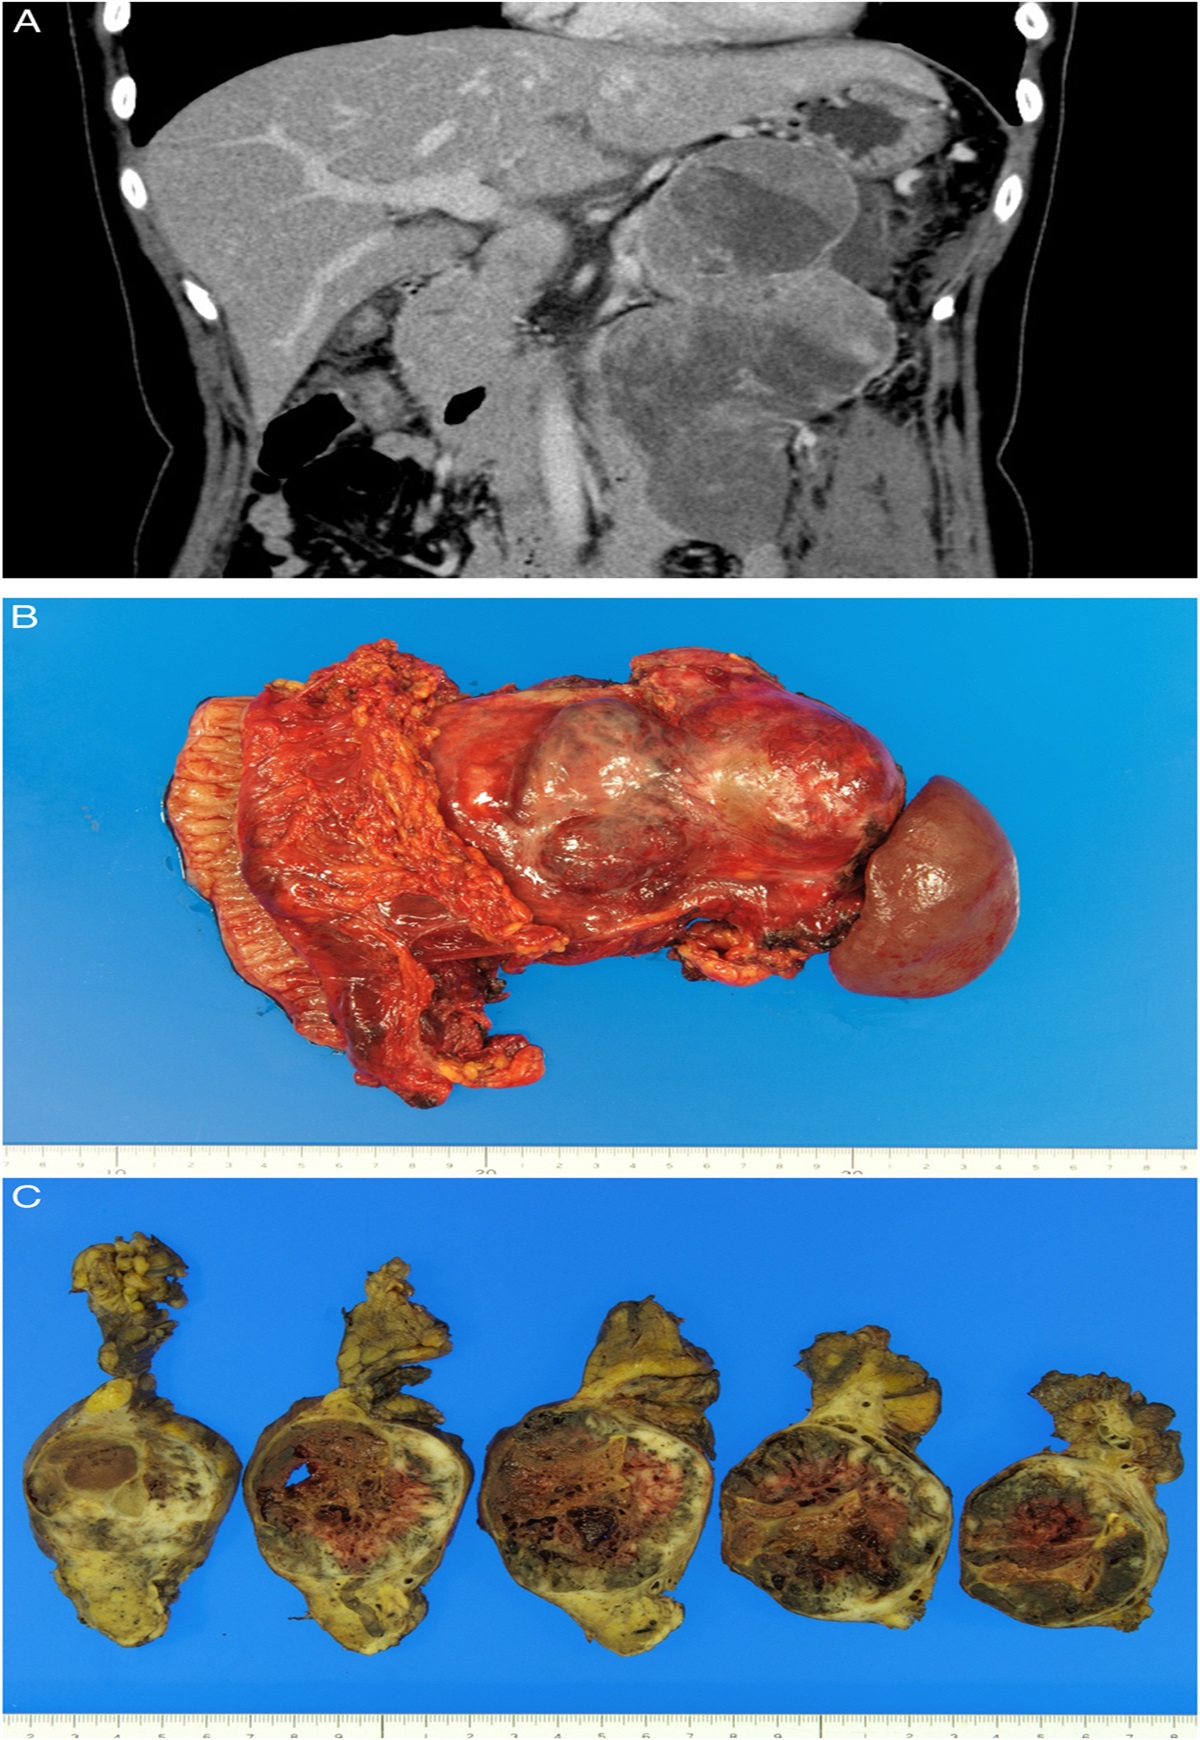 High-grade Solid Pseudopapillary Neoplasms of the Pancreas: Distinct Clinicopathological Malignant Features With Intriguing Gene Alterations through a Comparison With the Conventional Type